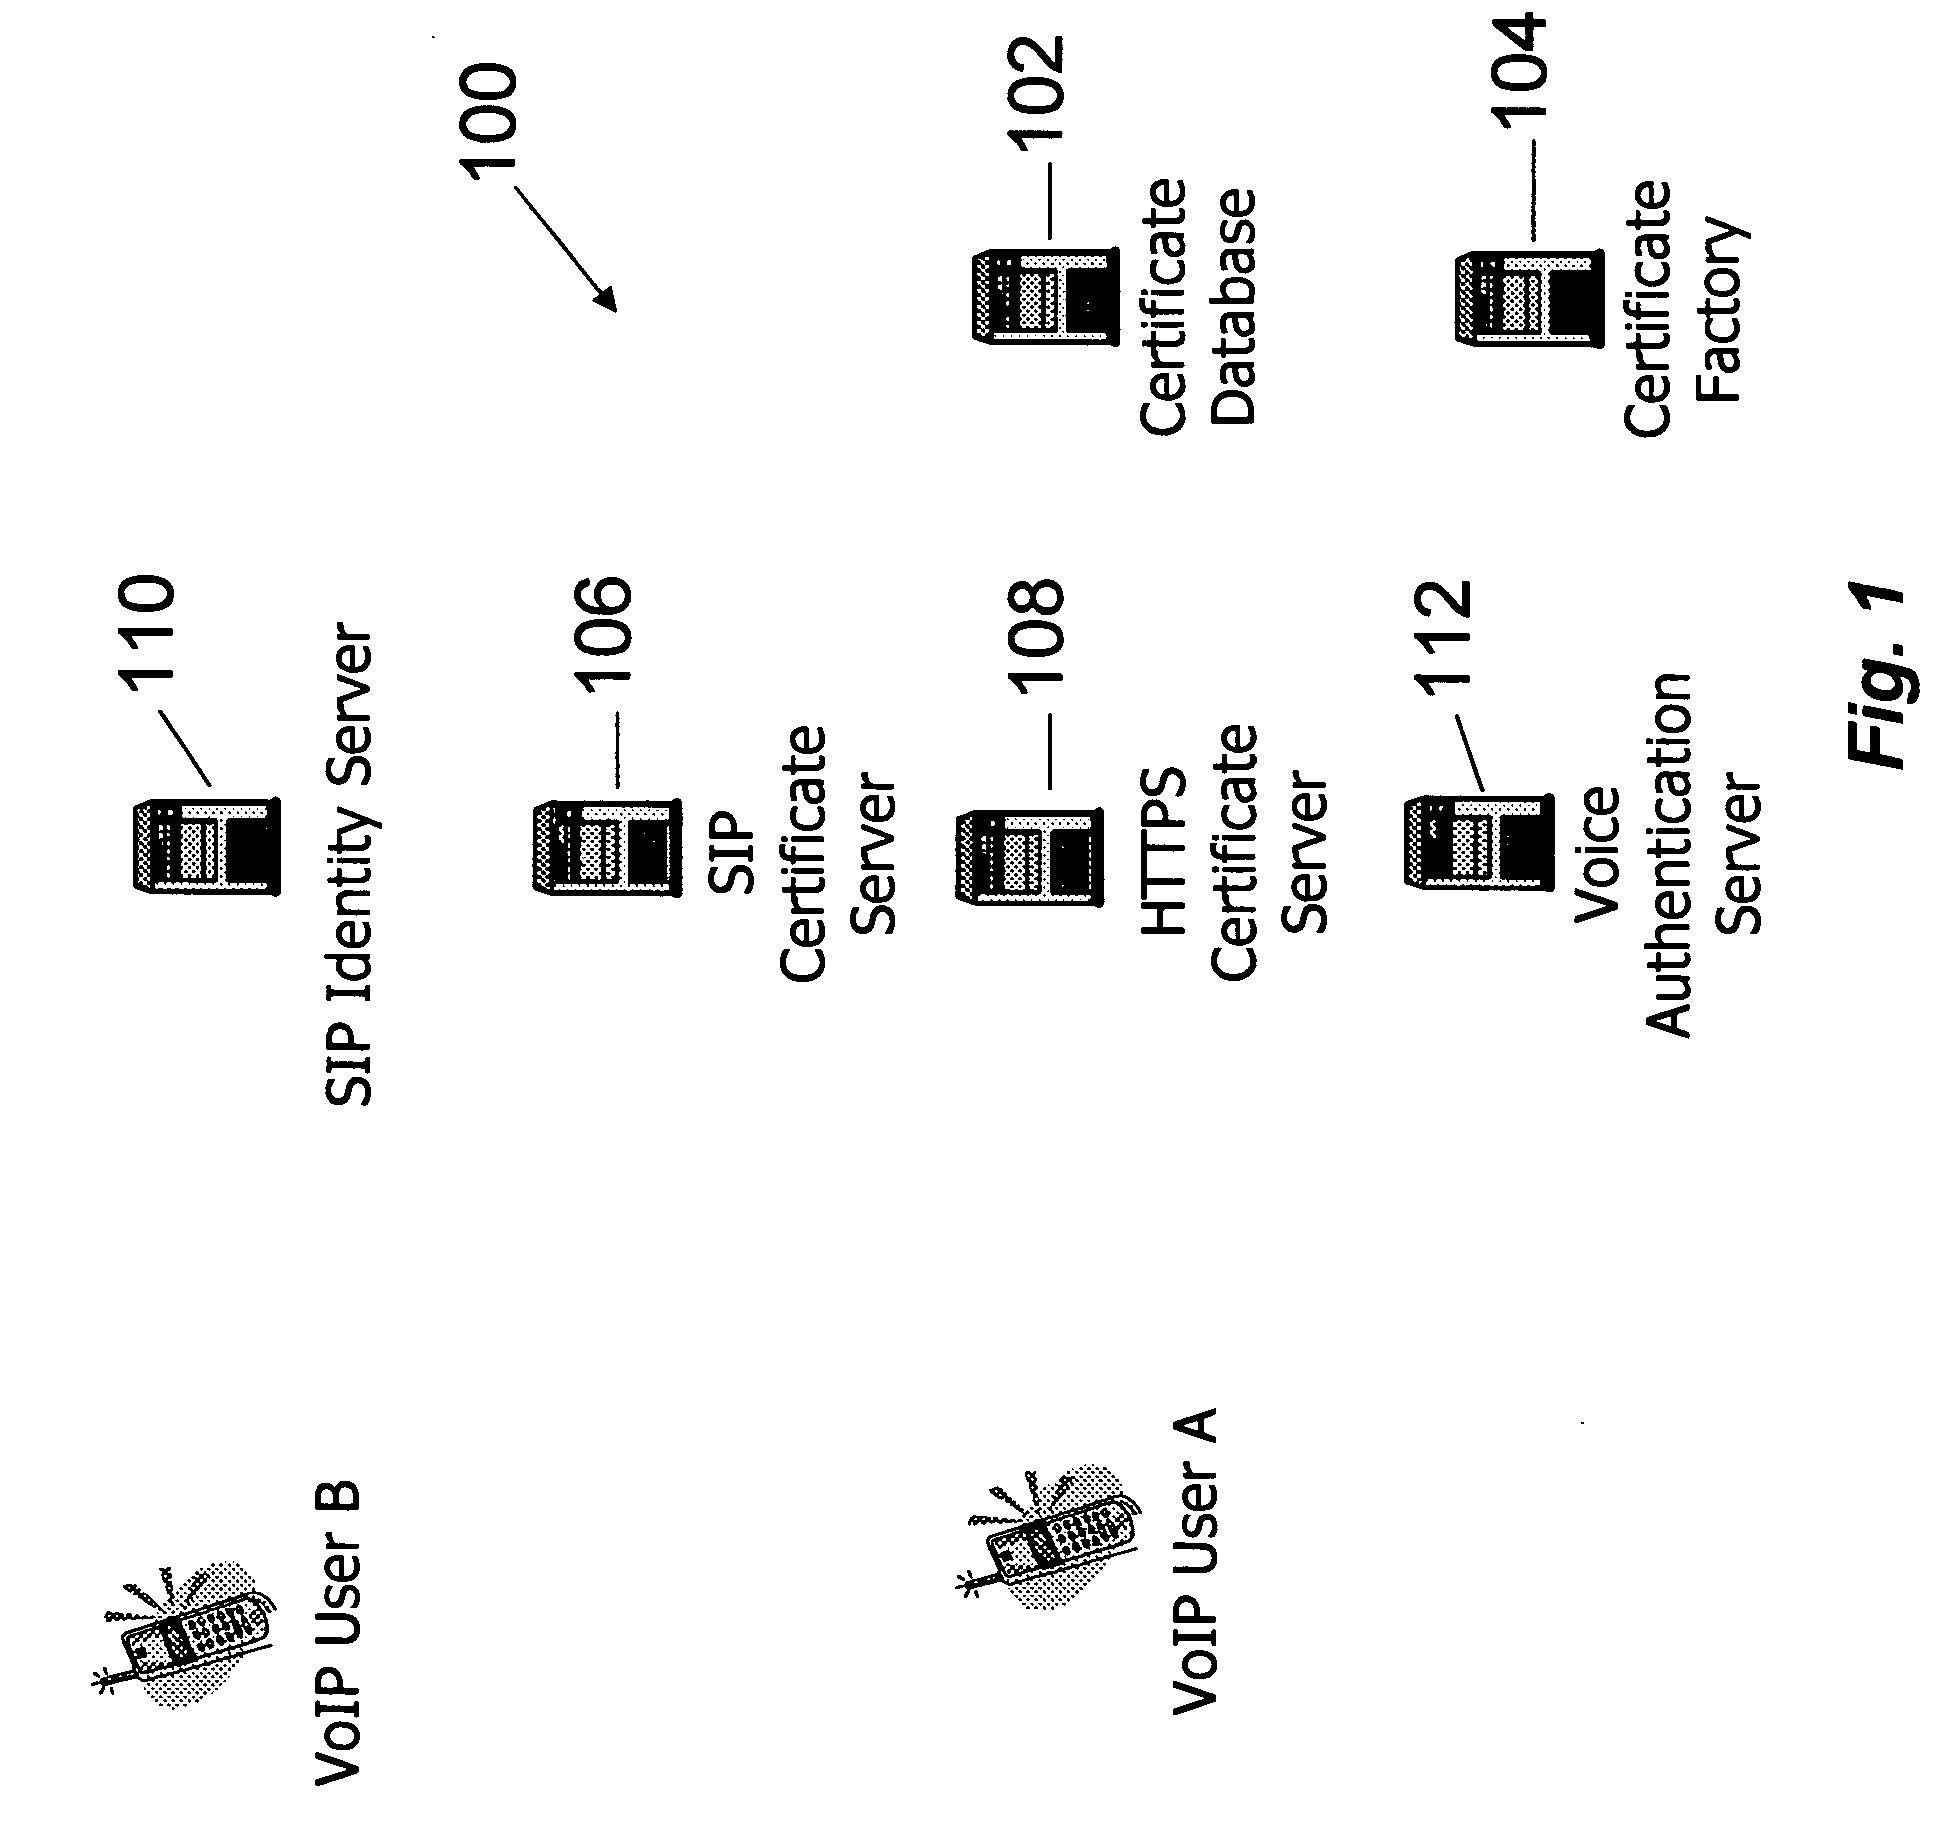 System and method for securely storing and accessing credentials and certificates for secure VoIP endpoints